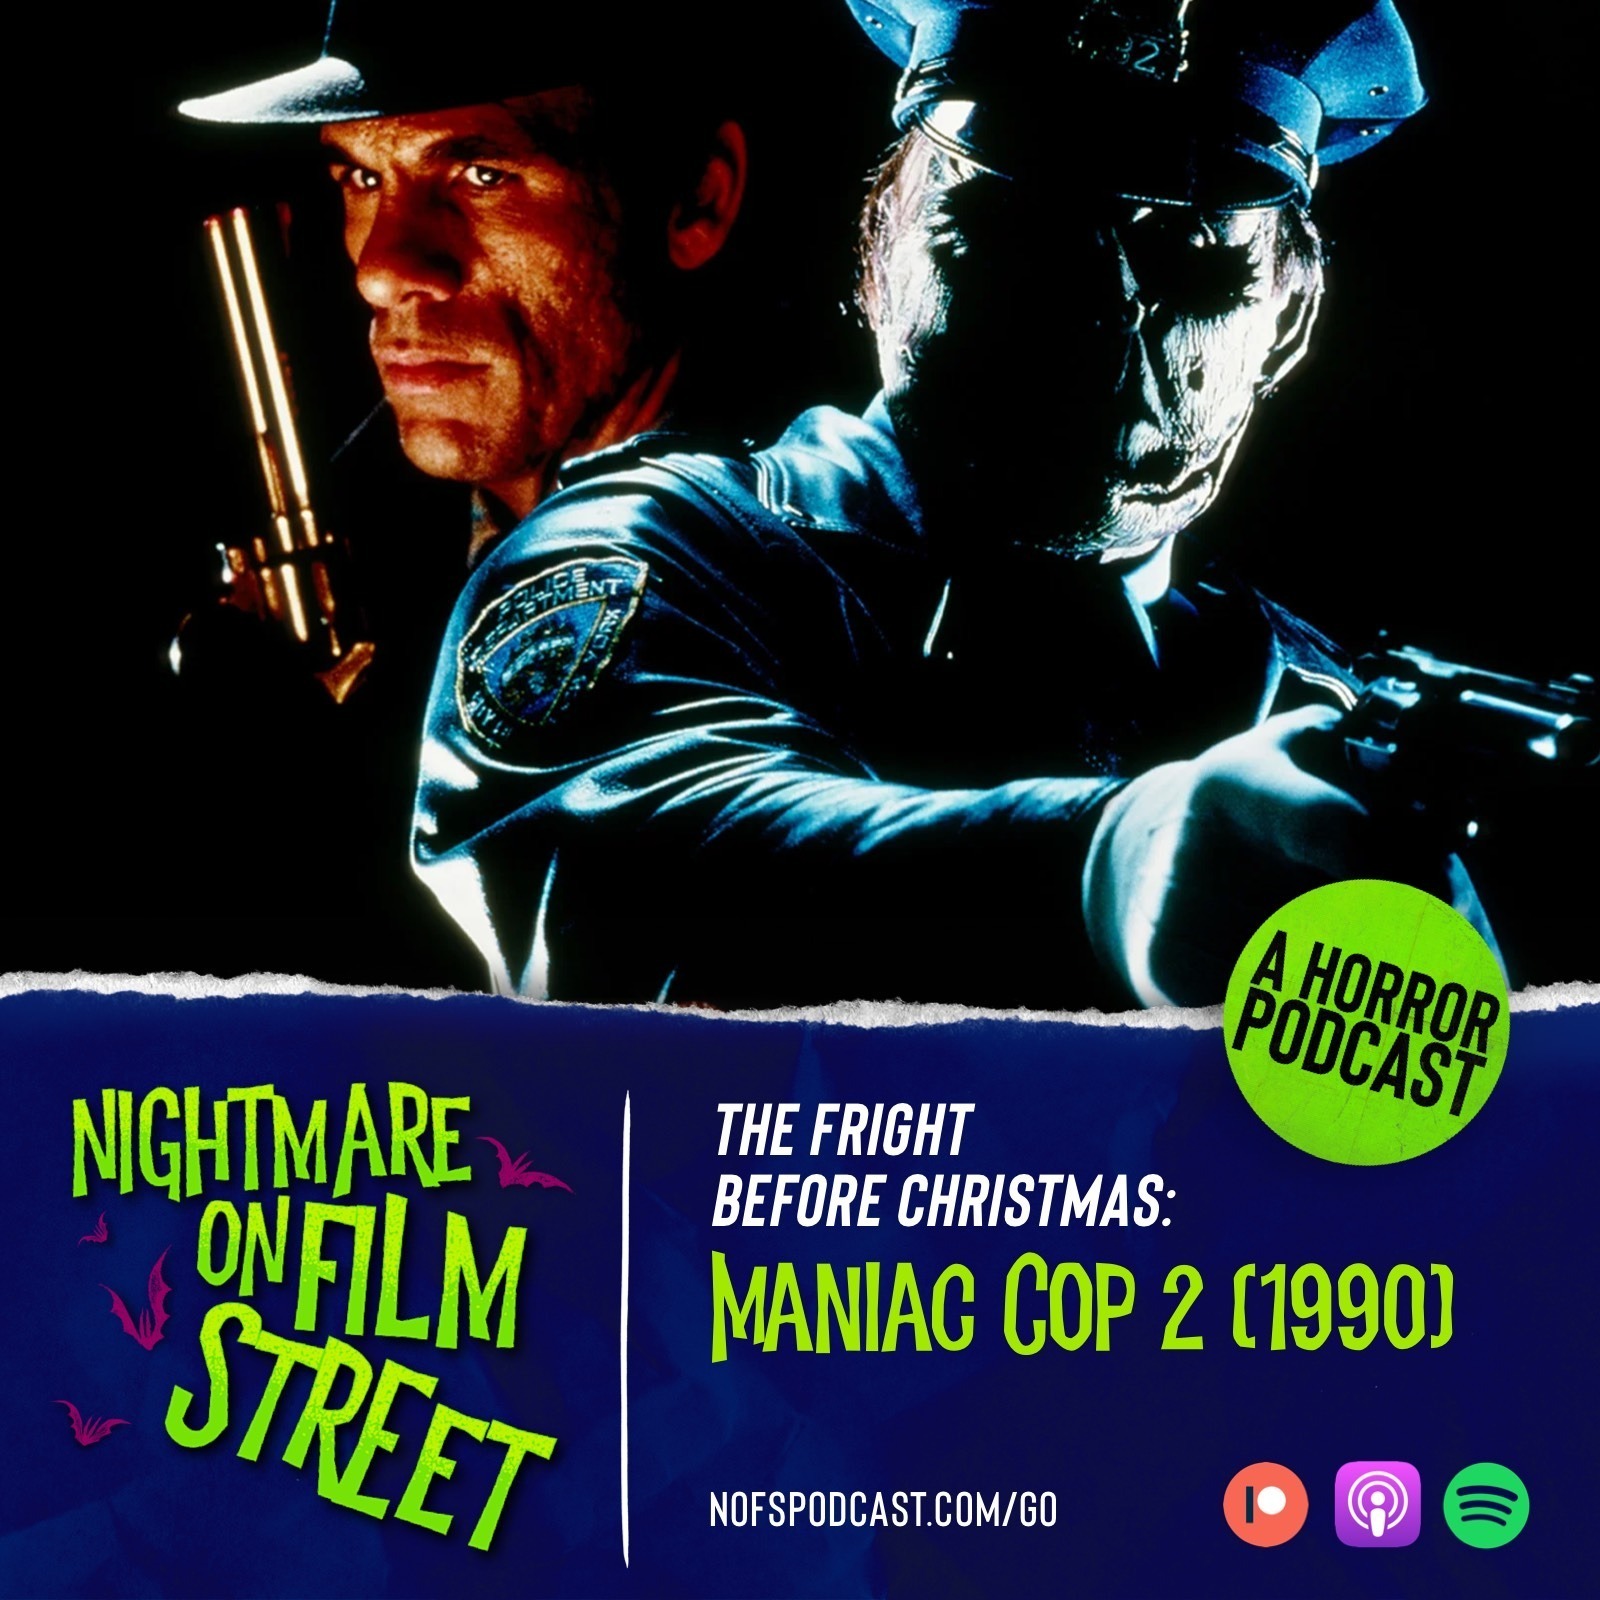 The Fright Before Christmas: Maniac Cop 2 (1990)